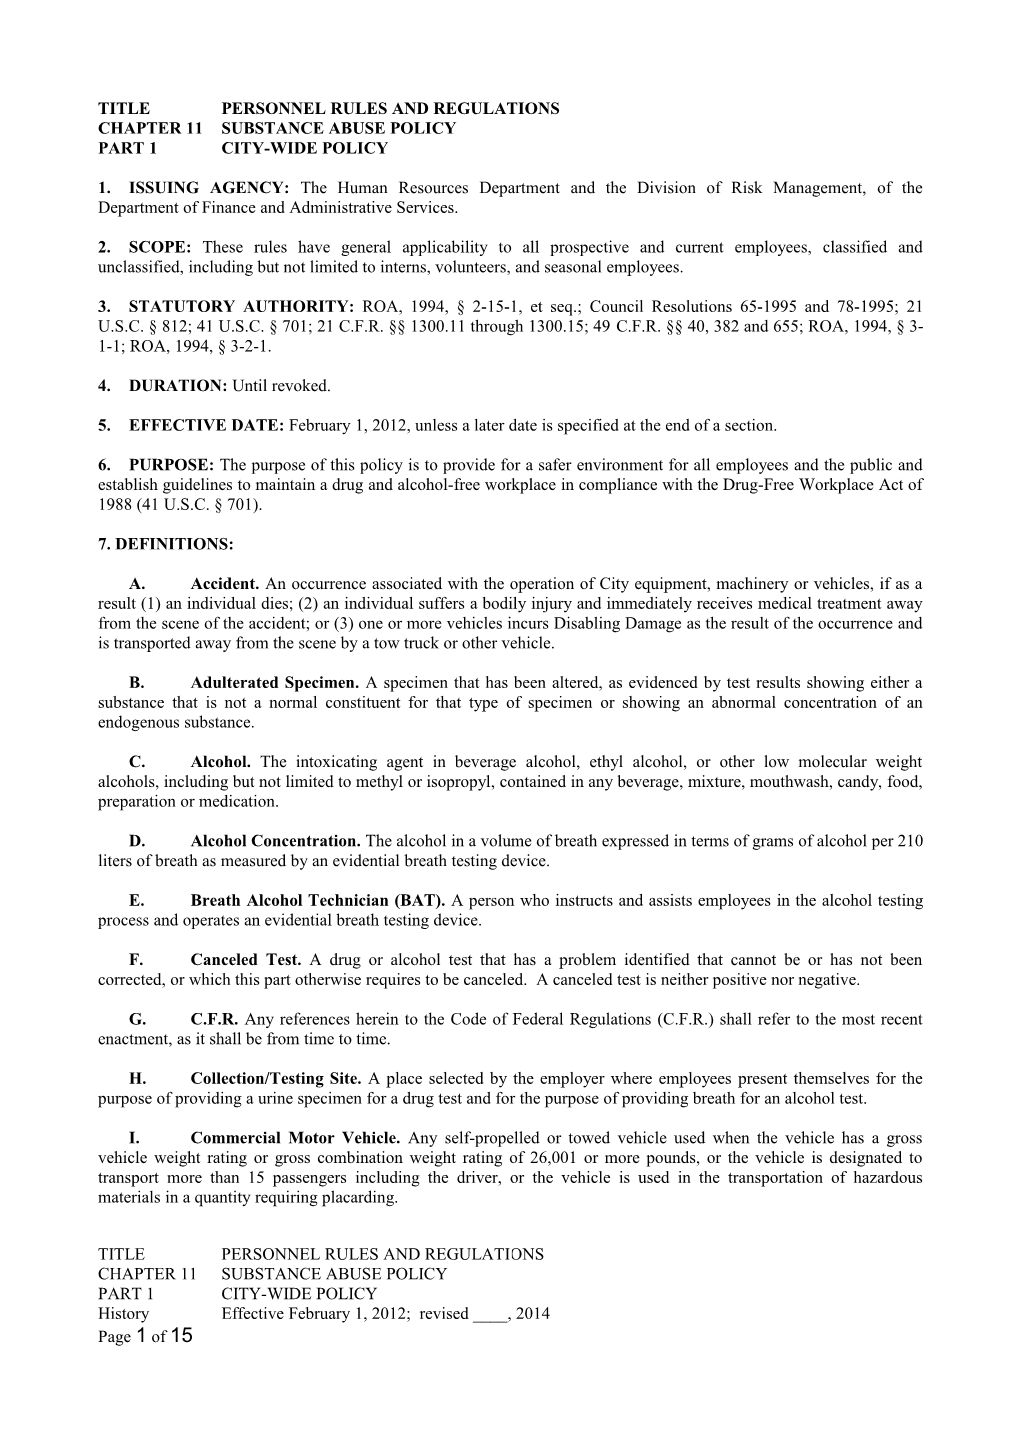 Title Personnel Rules and Regulations s1